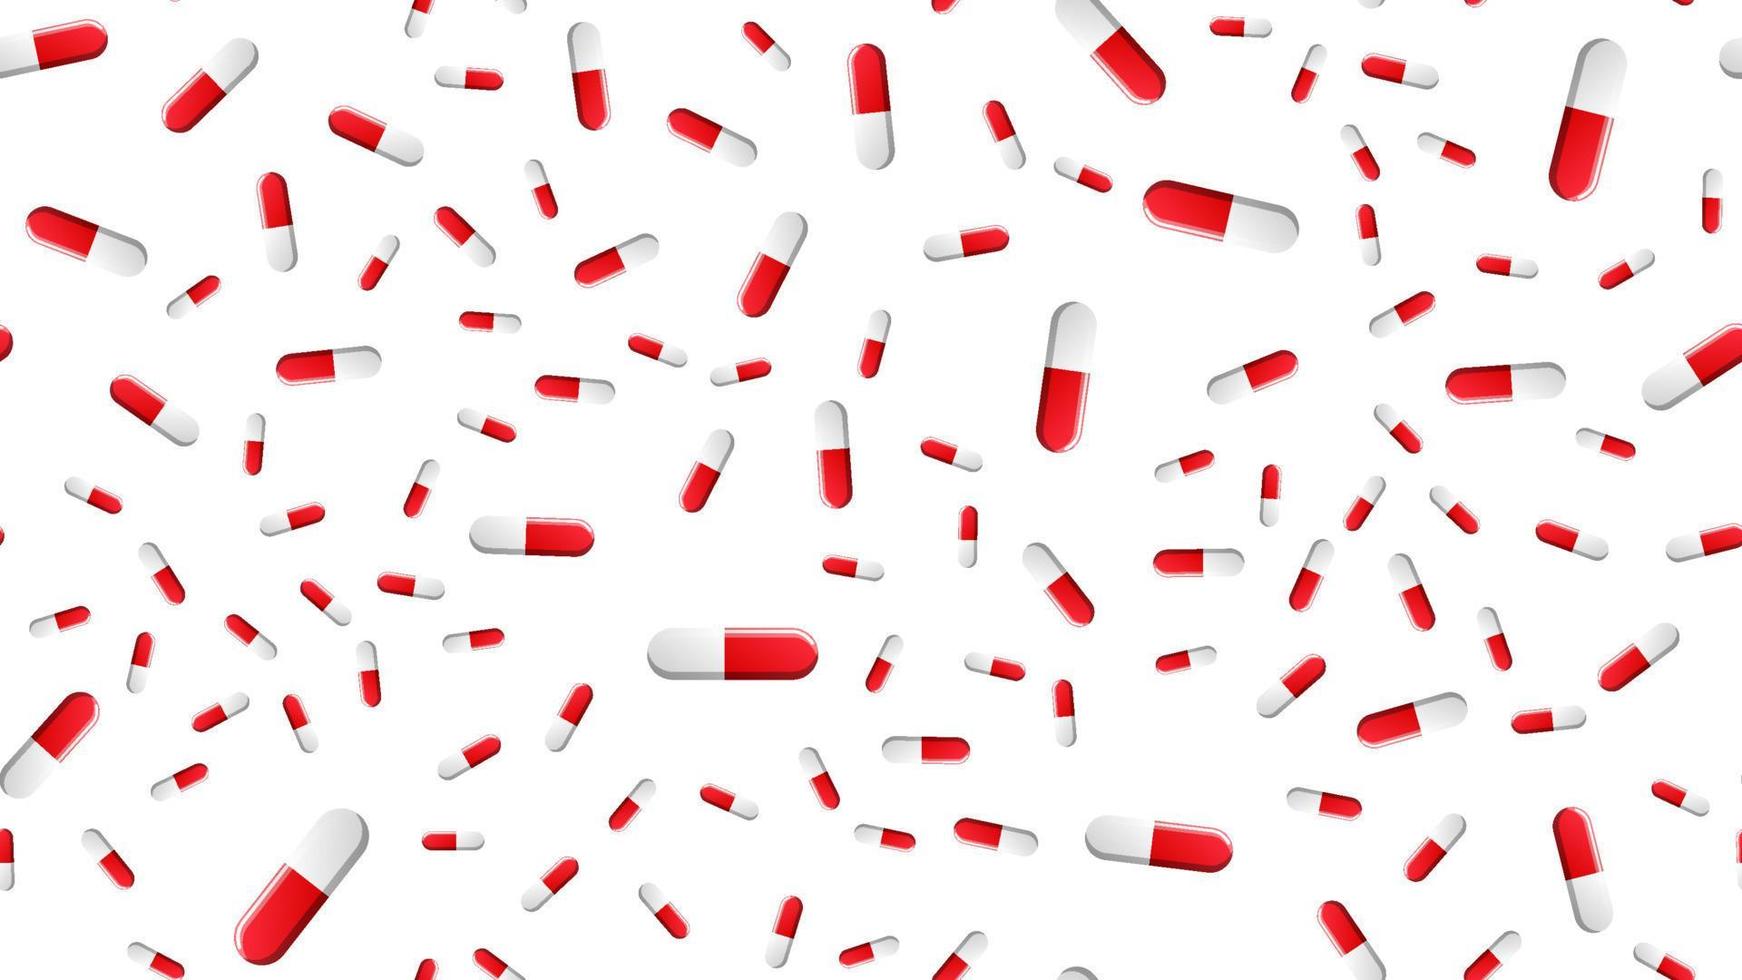 Endless seamless pattern of medical scientific medical items, pharmacological tablets and medications, pill capsules on a white background. Vector illustration